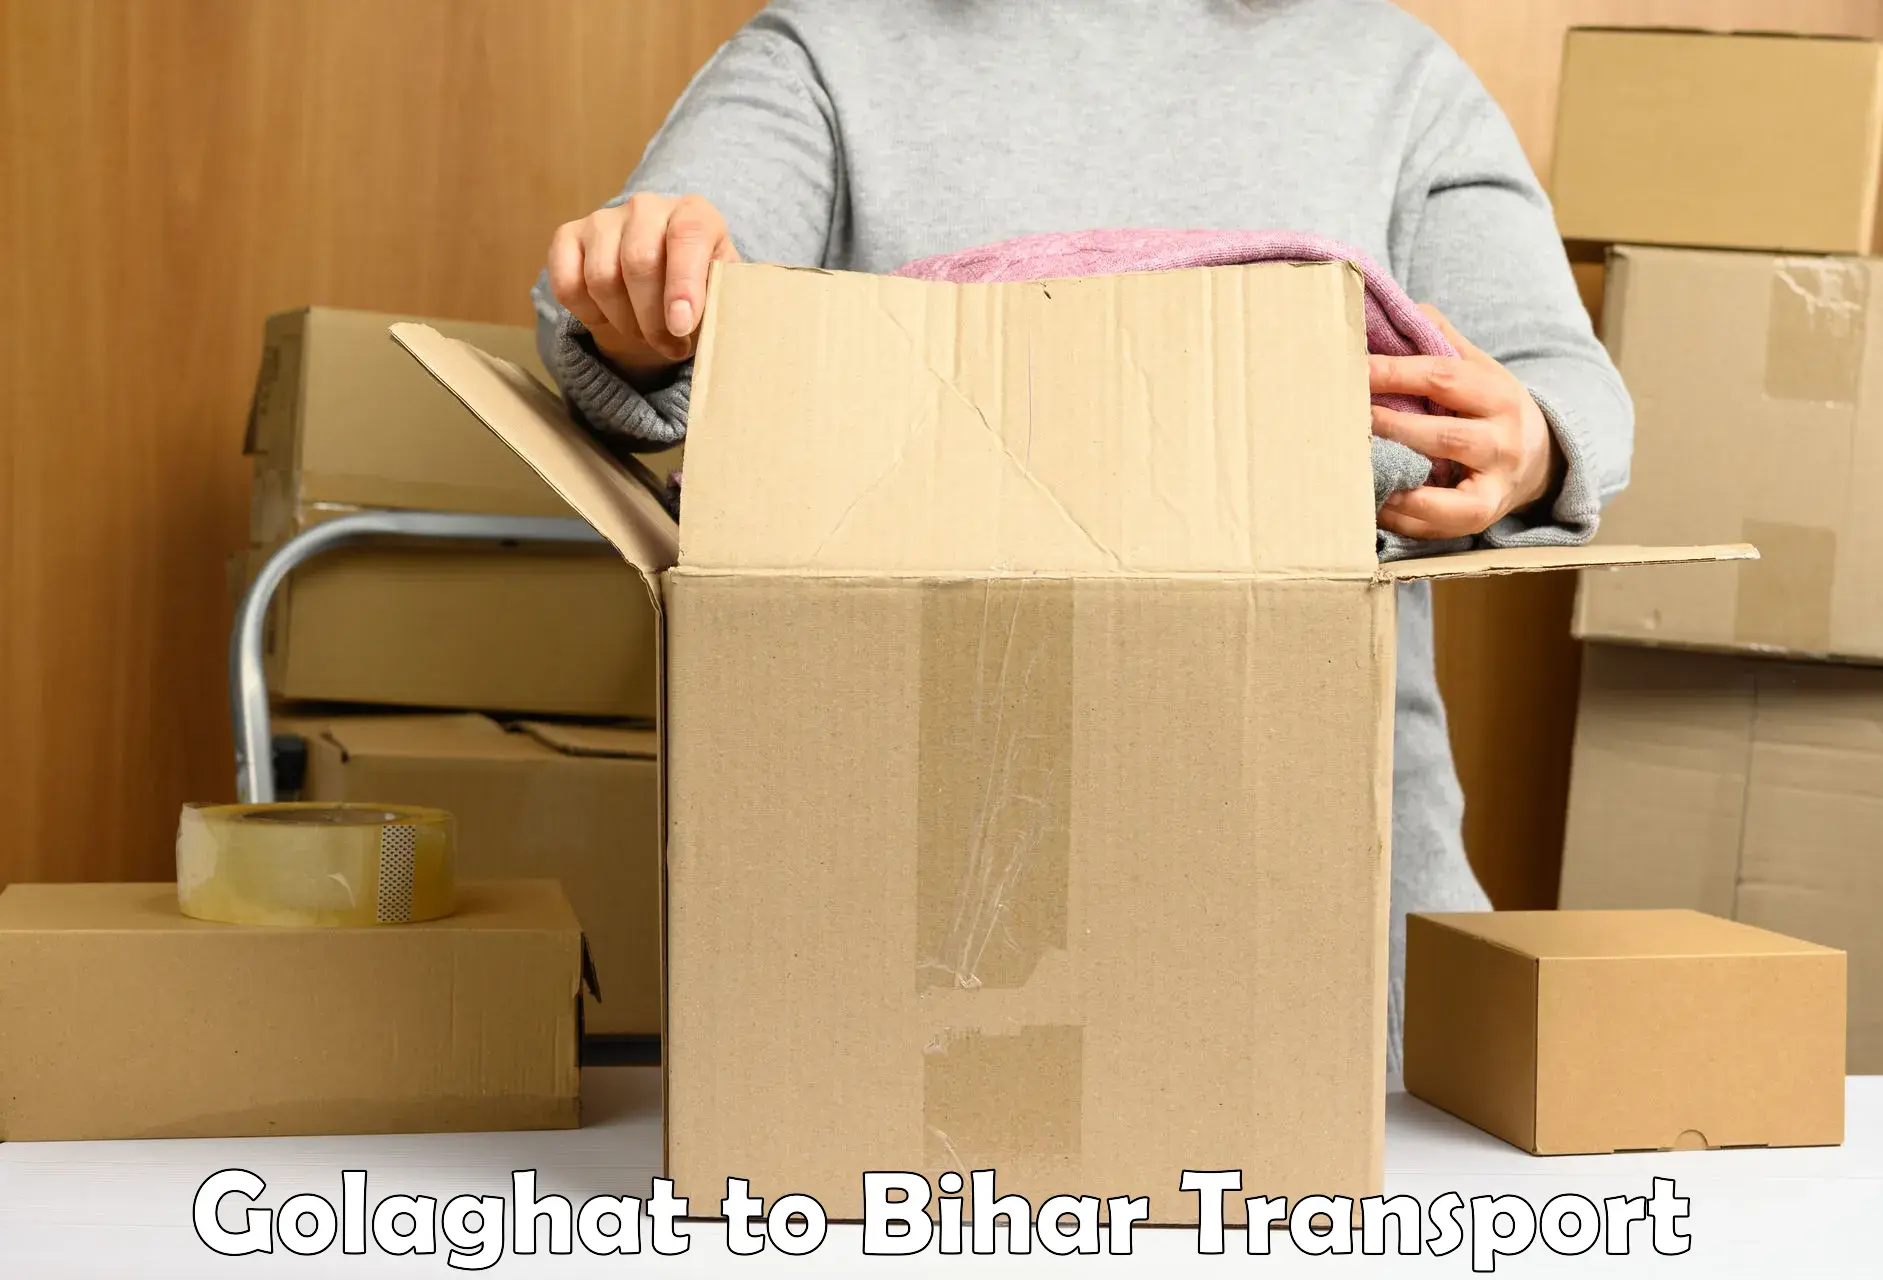 Bike shipping service Golaghat to Patna